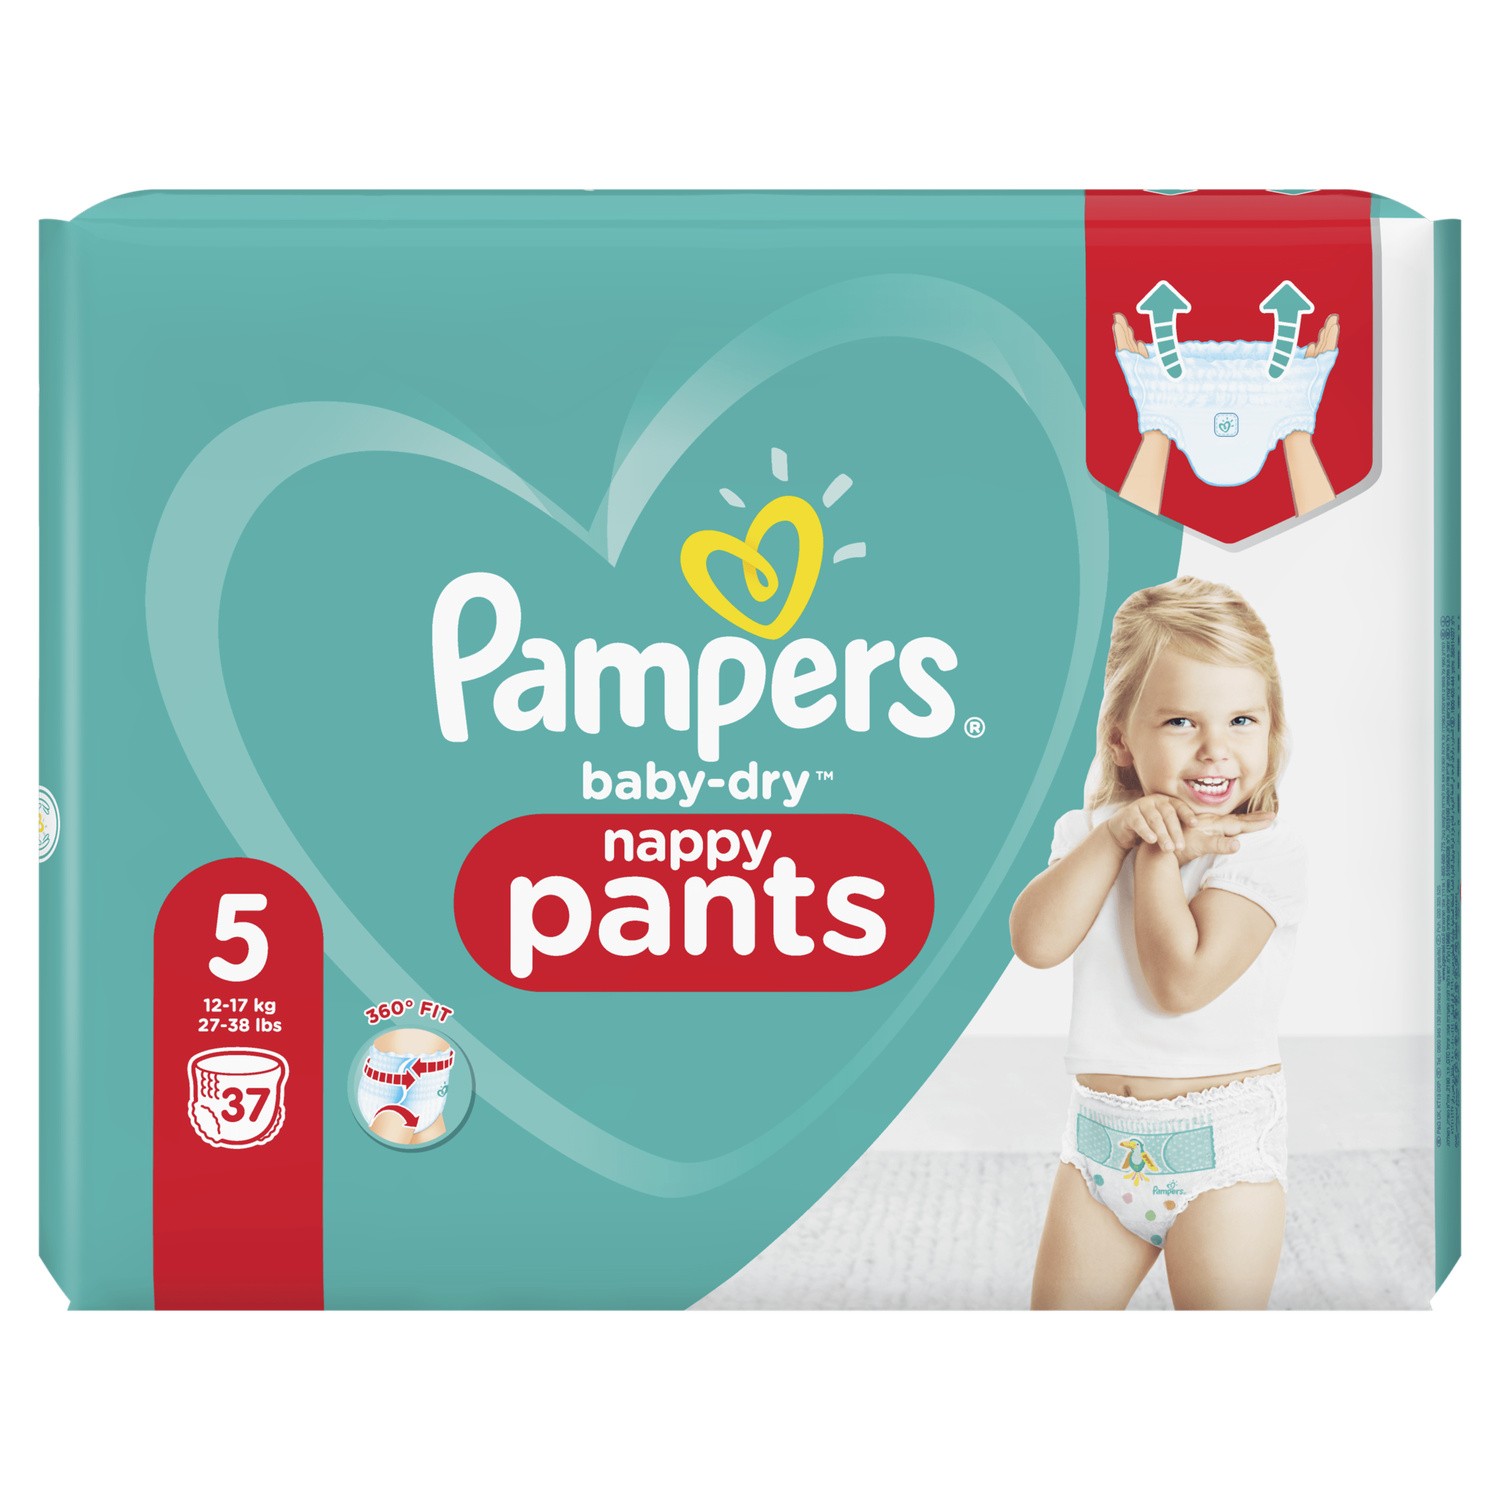 Couches-culottes PAMPERS Baby-Dry Pants Taille 5 - 38 couches-culottes